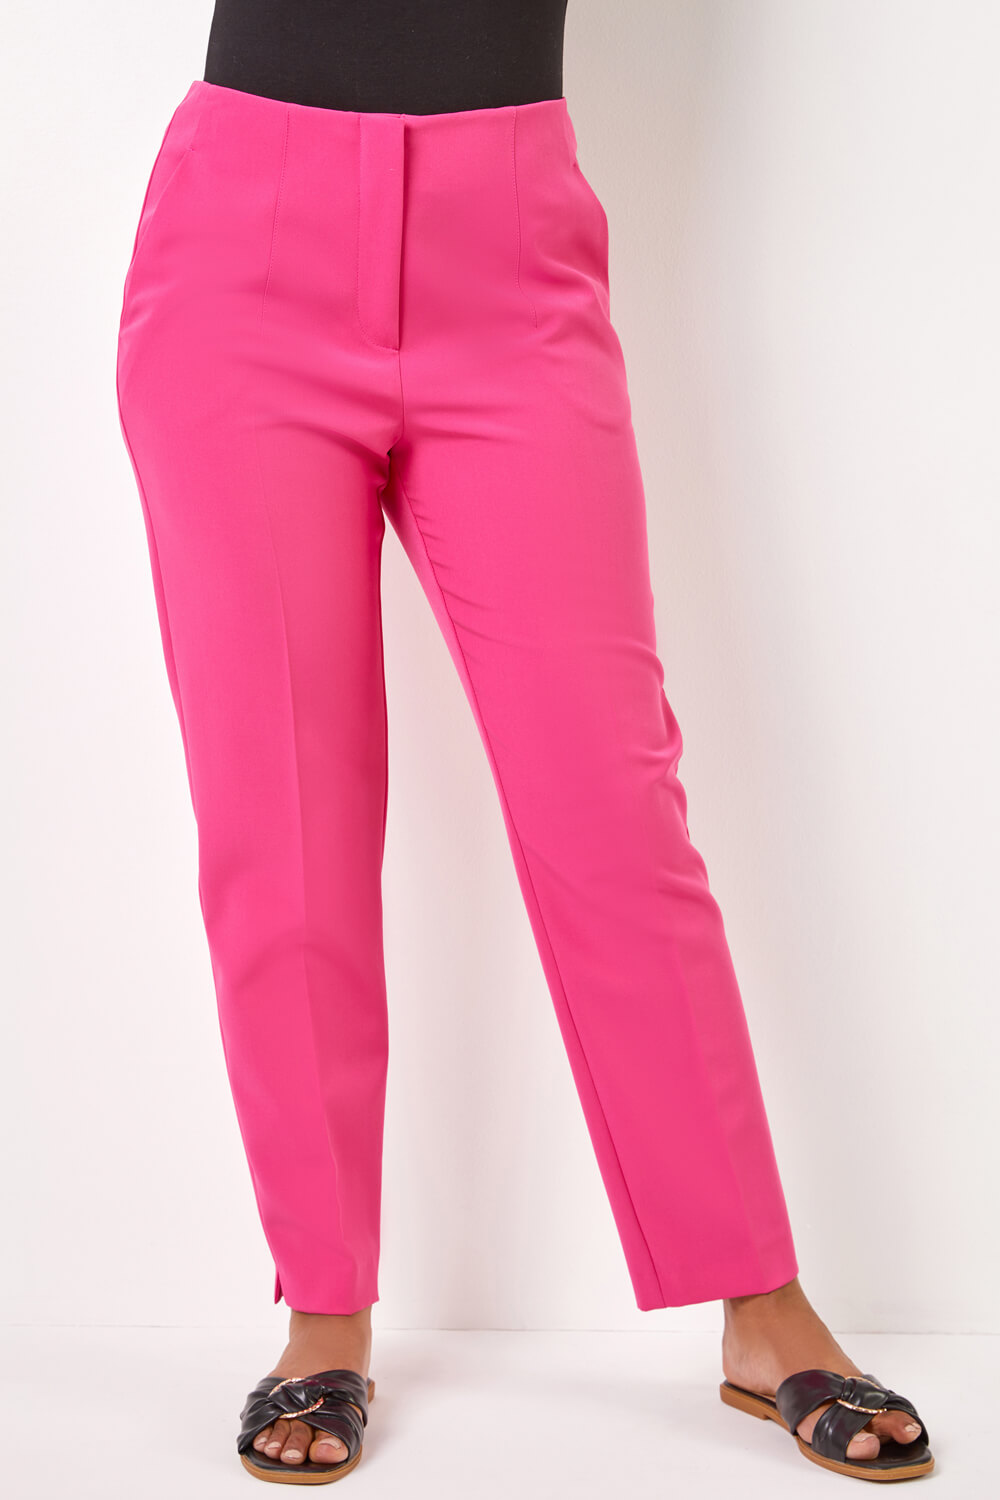 Buy Robell Fluro Pink Ginger Slim Fit Trousers on Sale | Cilento